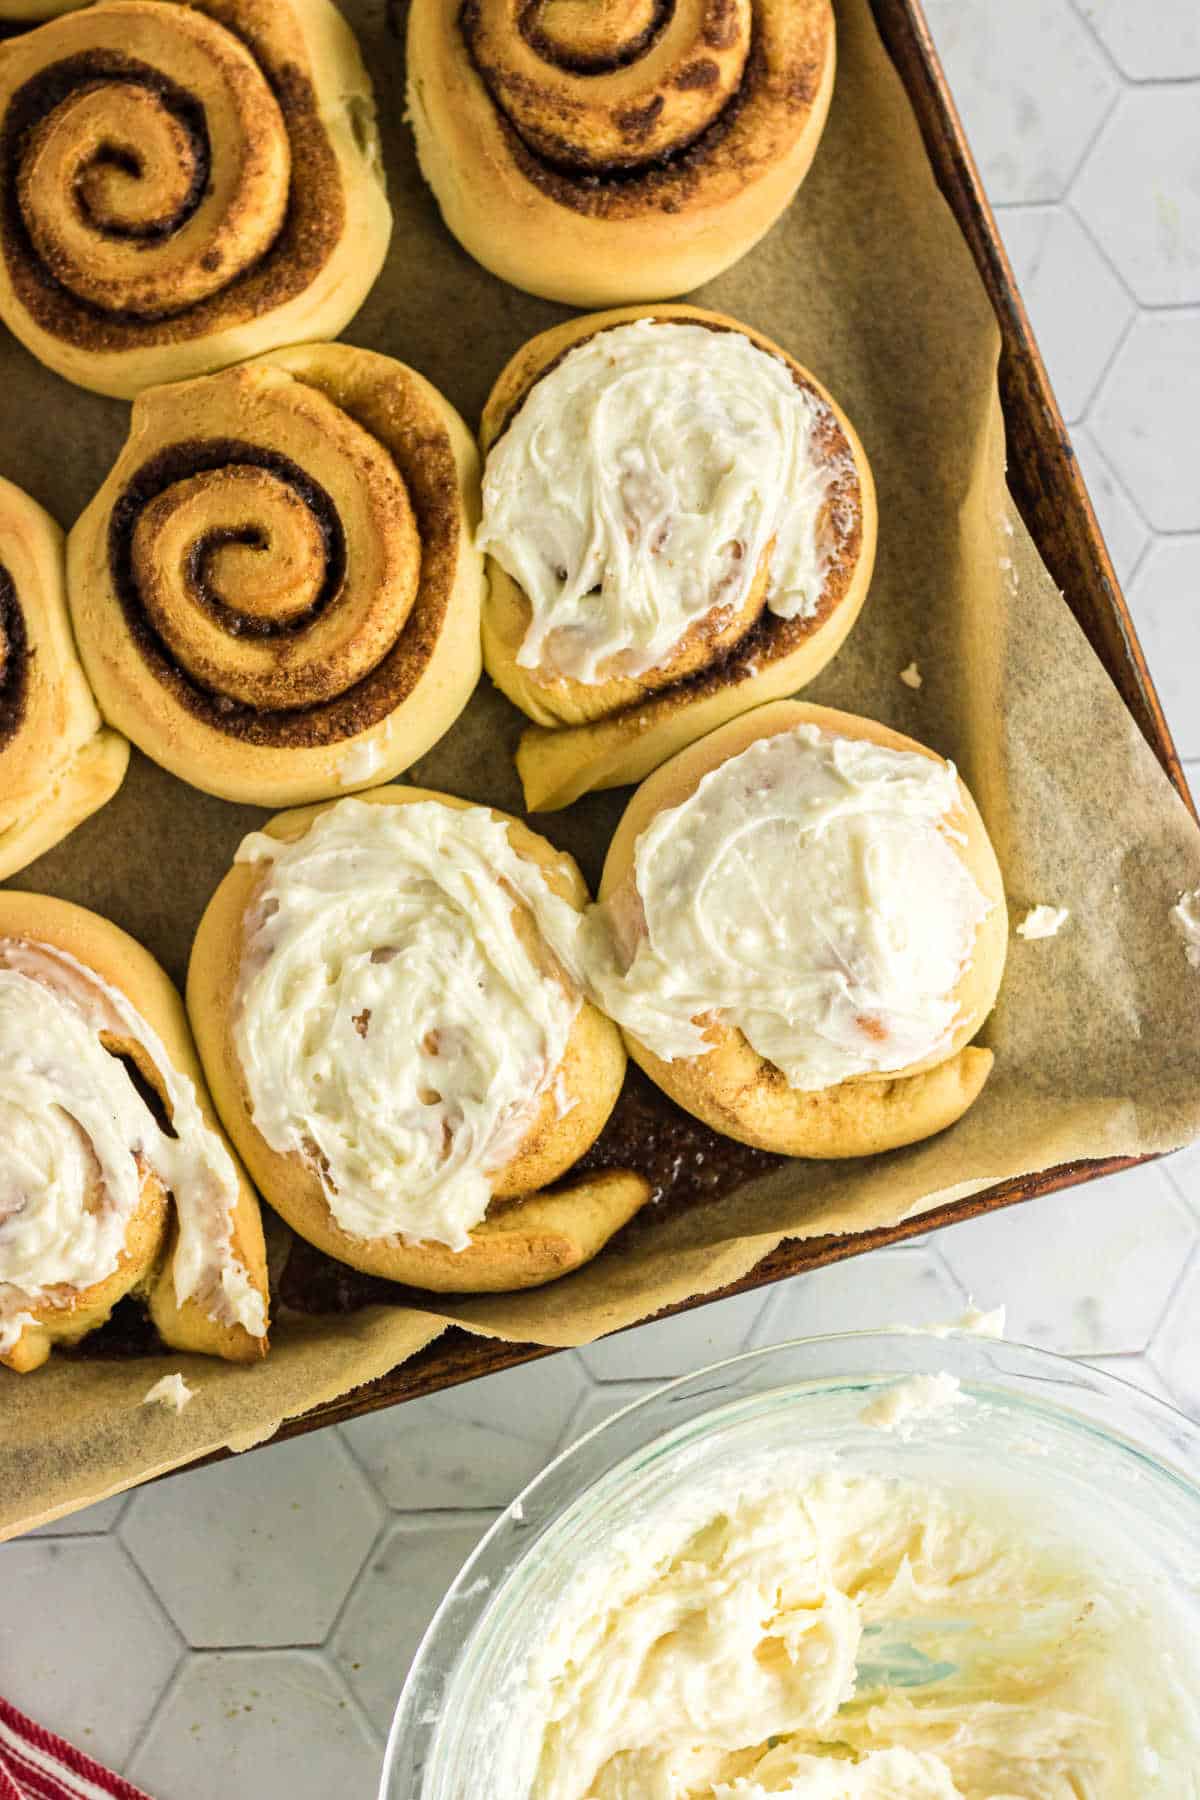 Overhead view of cinnamon rolls in a tray.